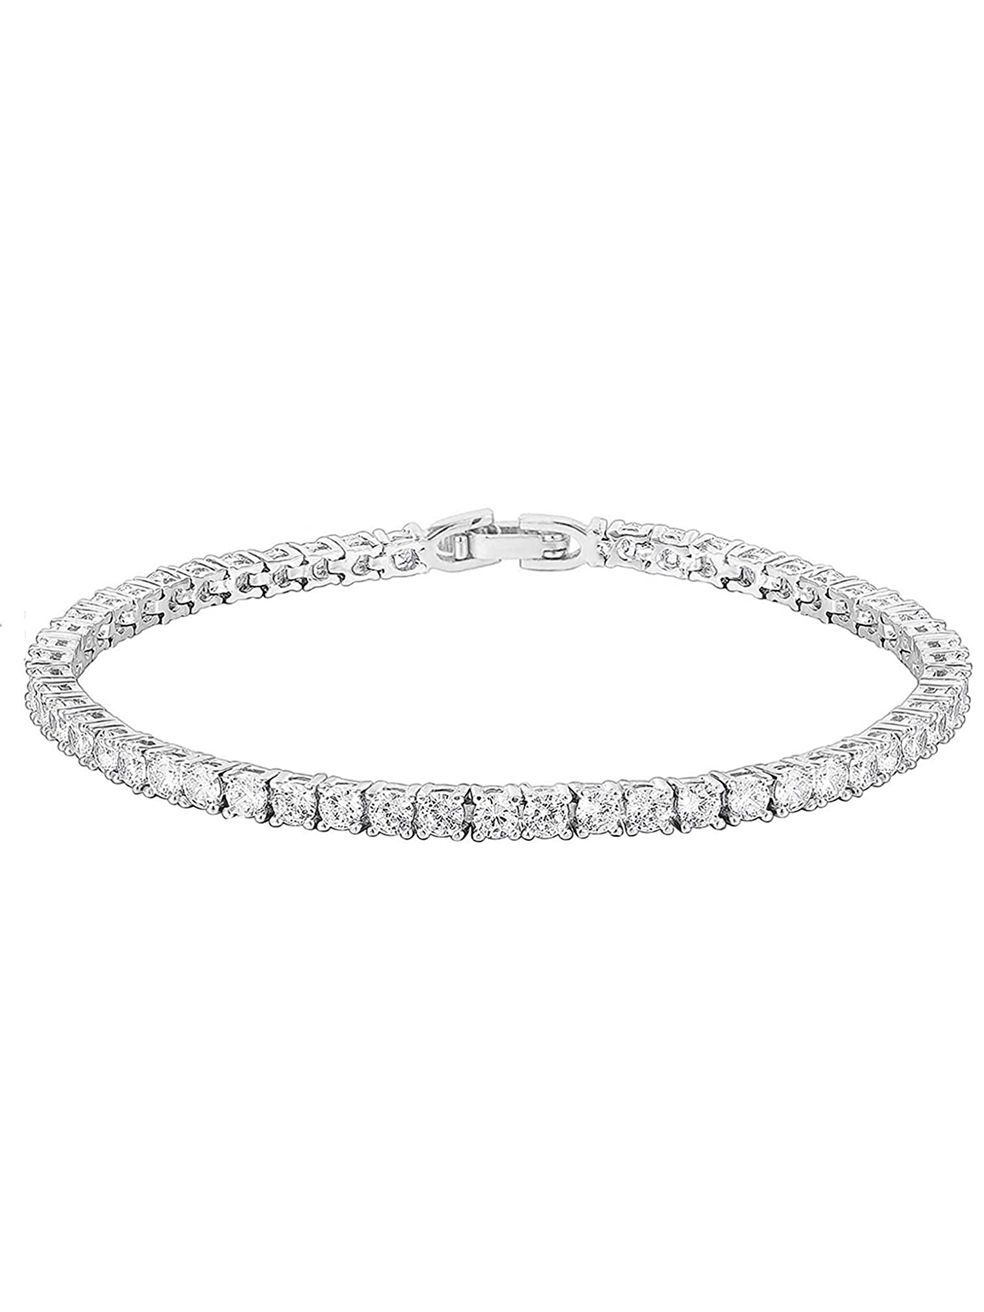 Diamond Tennis Bracelets A Guide  With Clarity